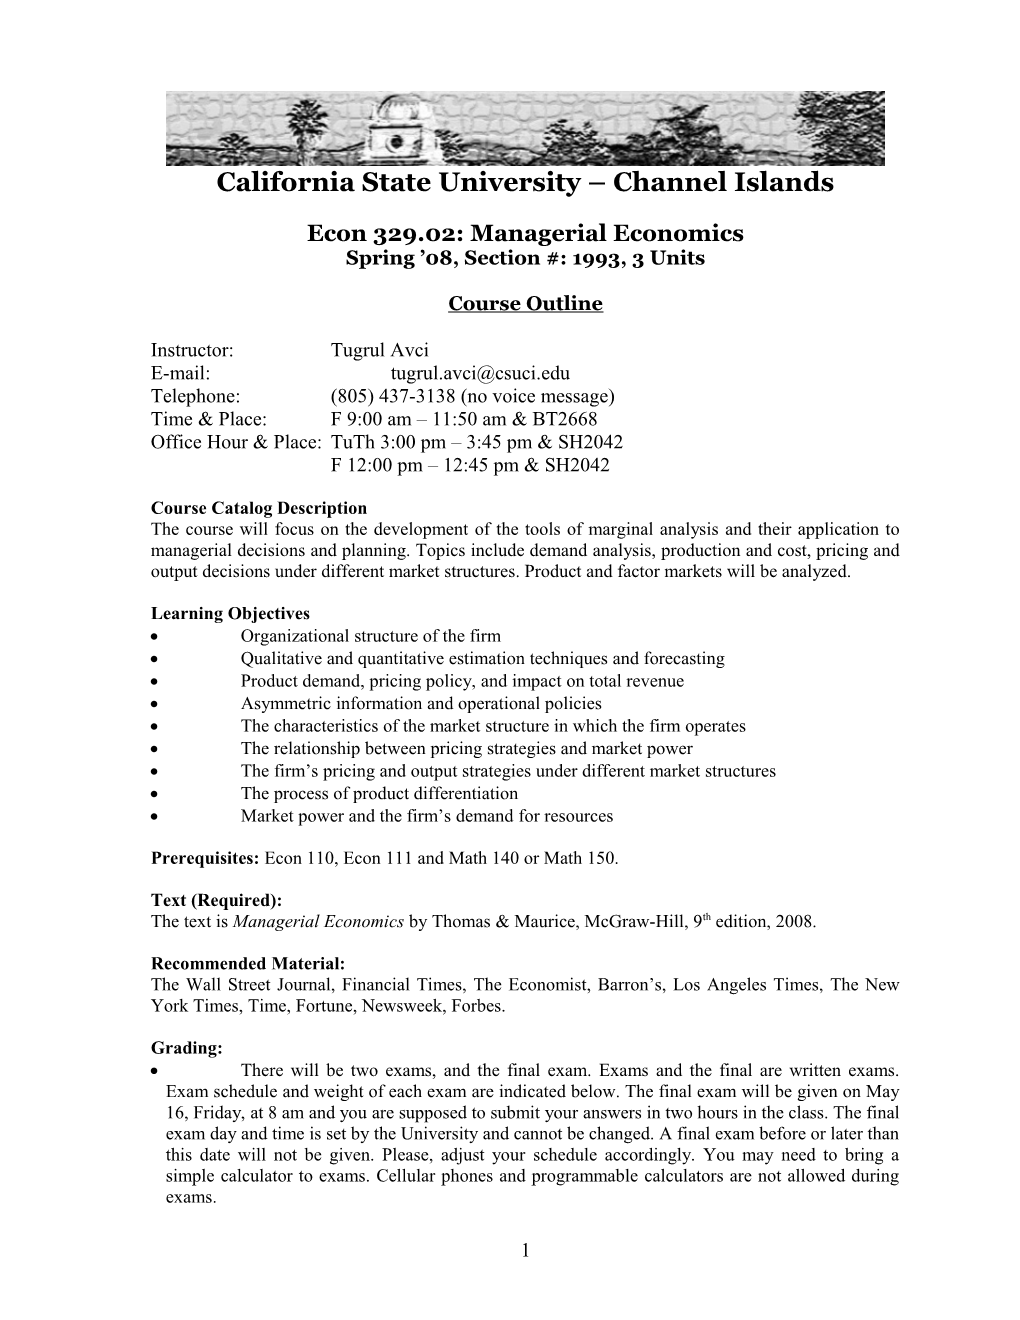 California State University Channel Islands s1